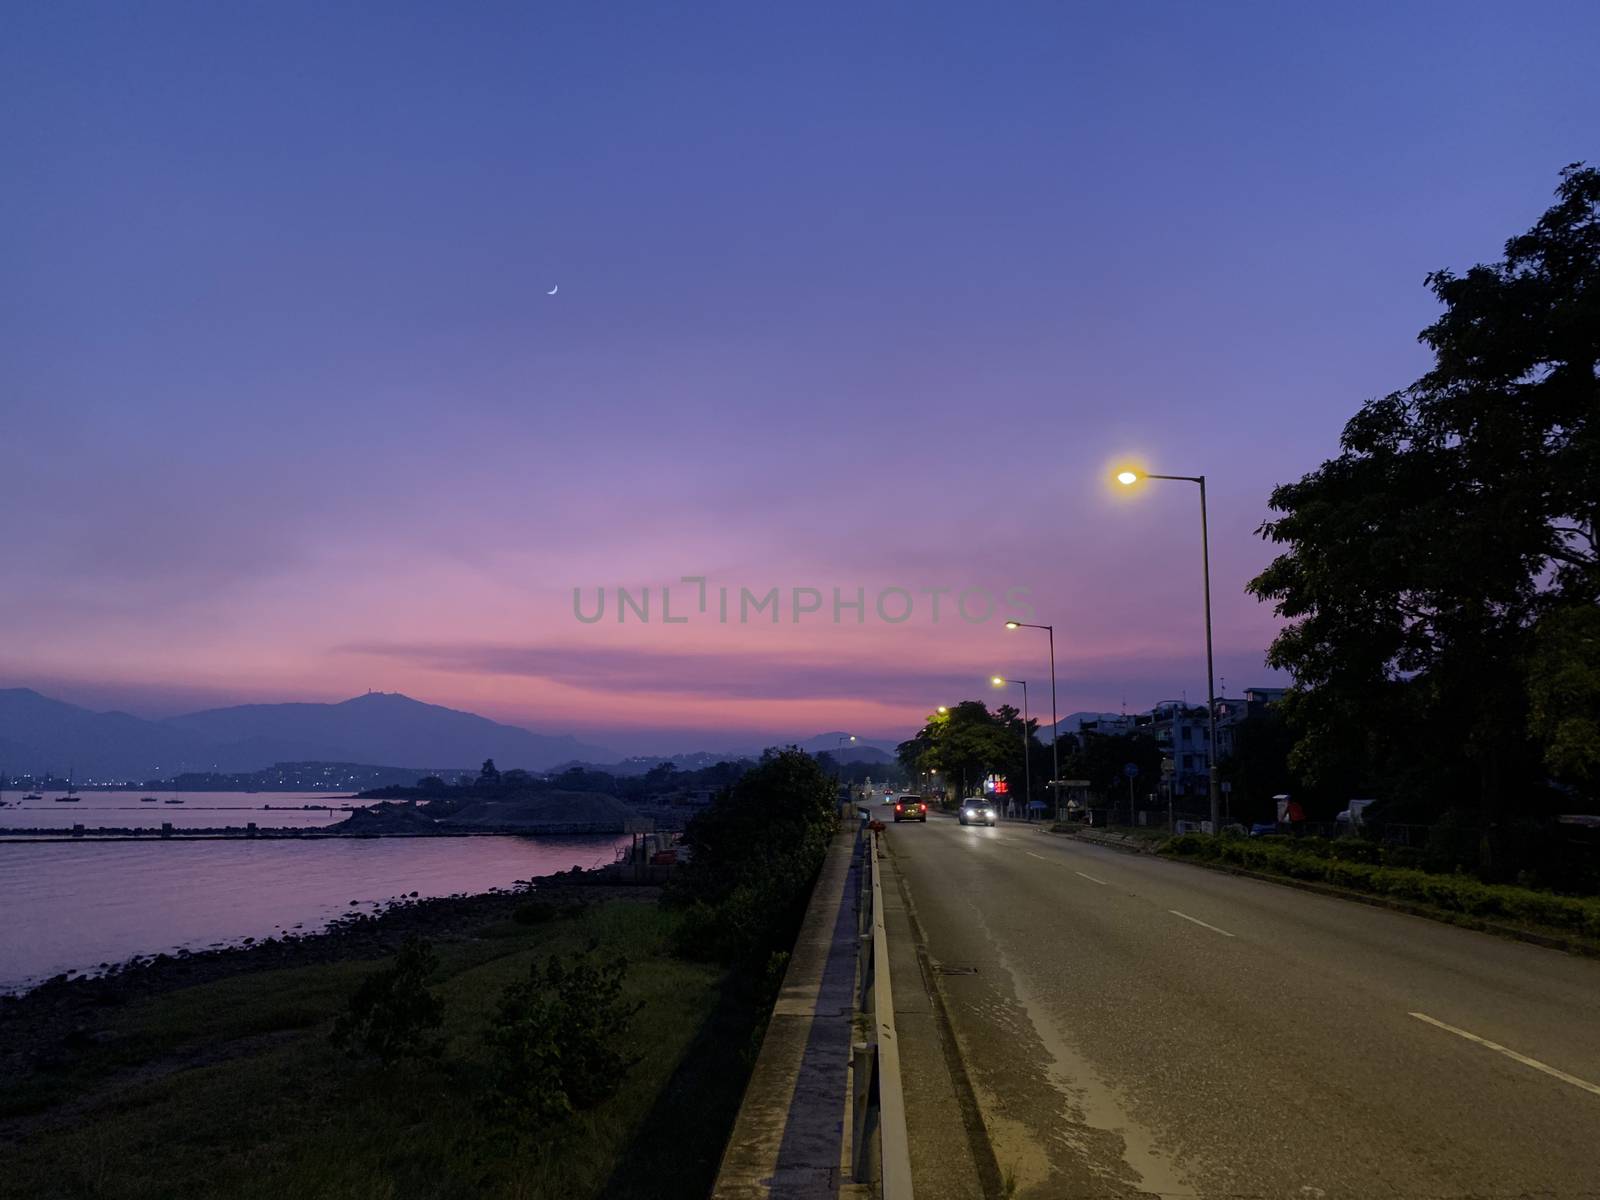 pink and purple gradient sky, car road, bay and mountain by cougarsan